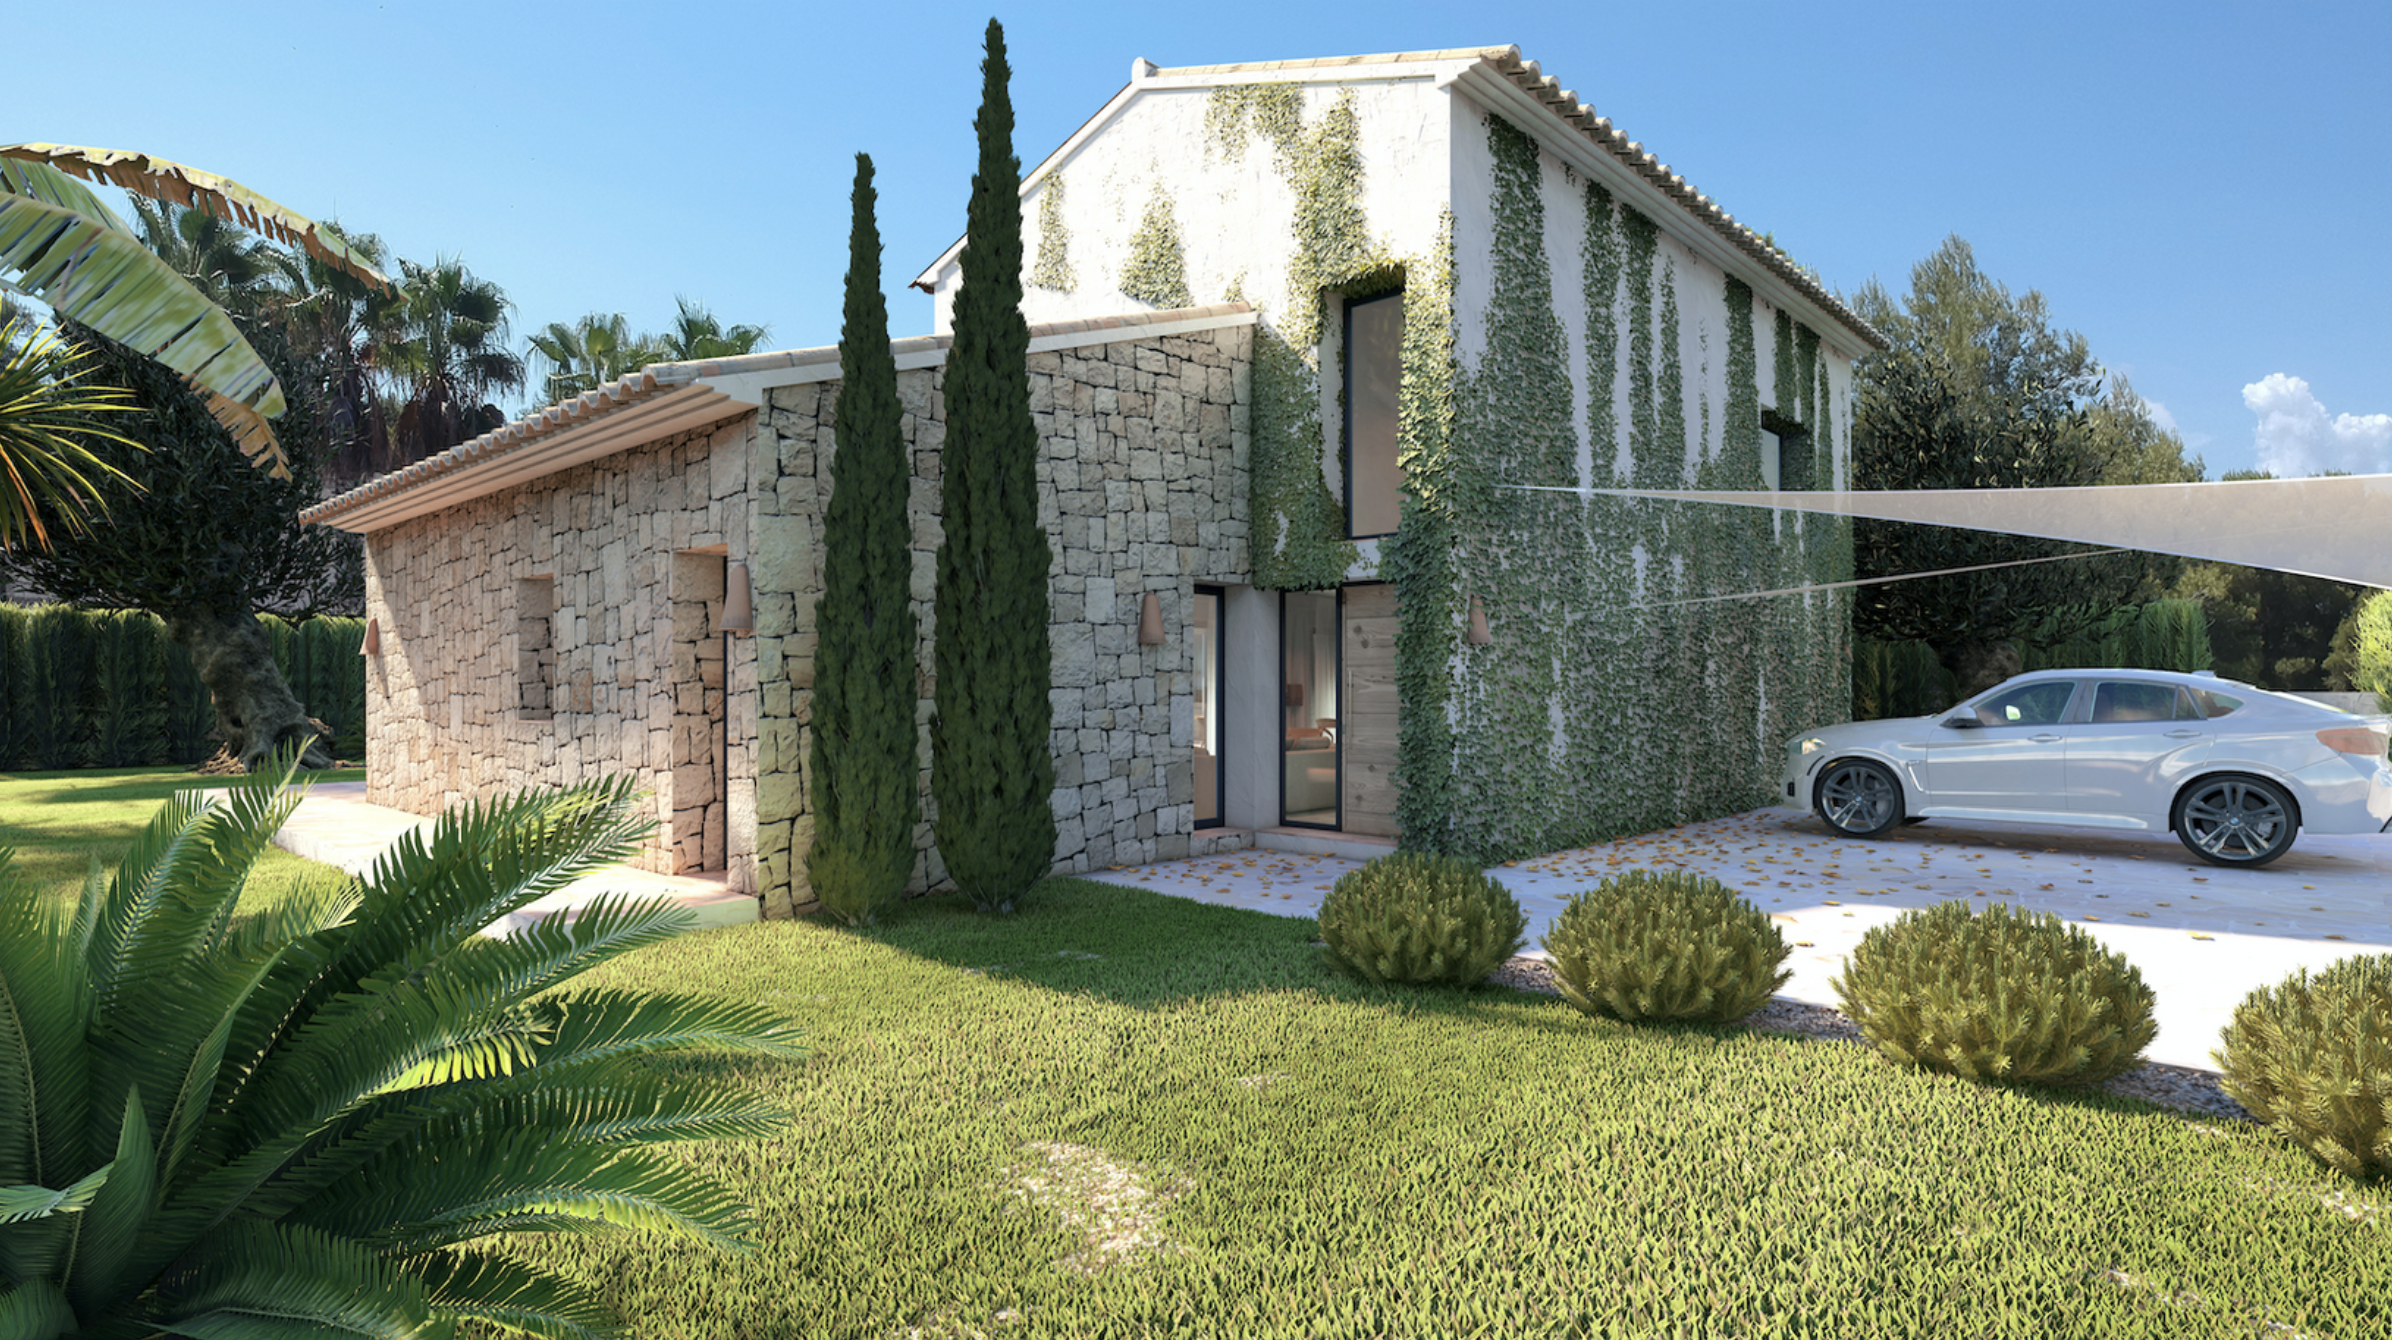 Project for sale in Javea